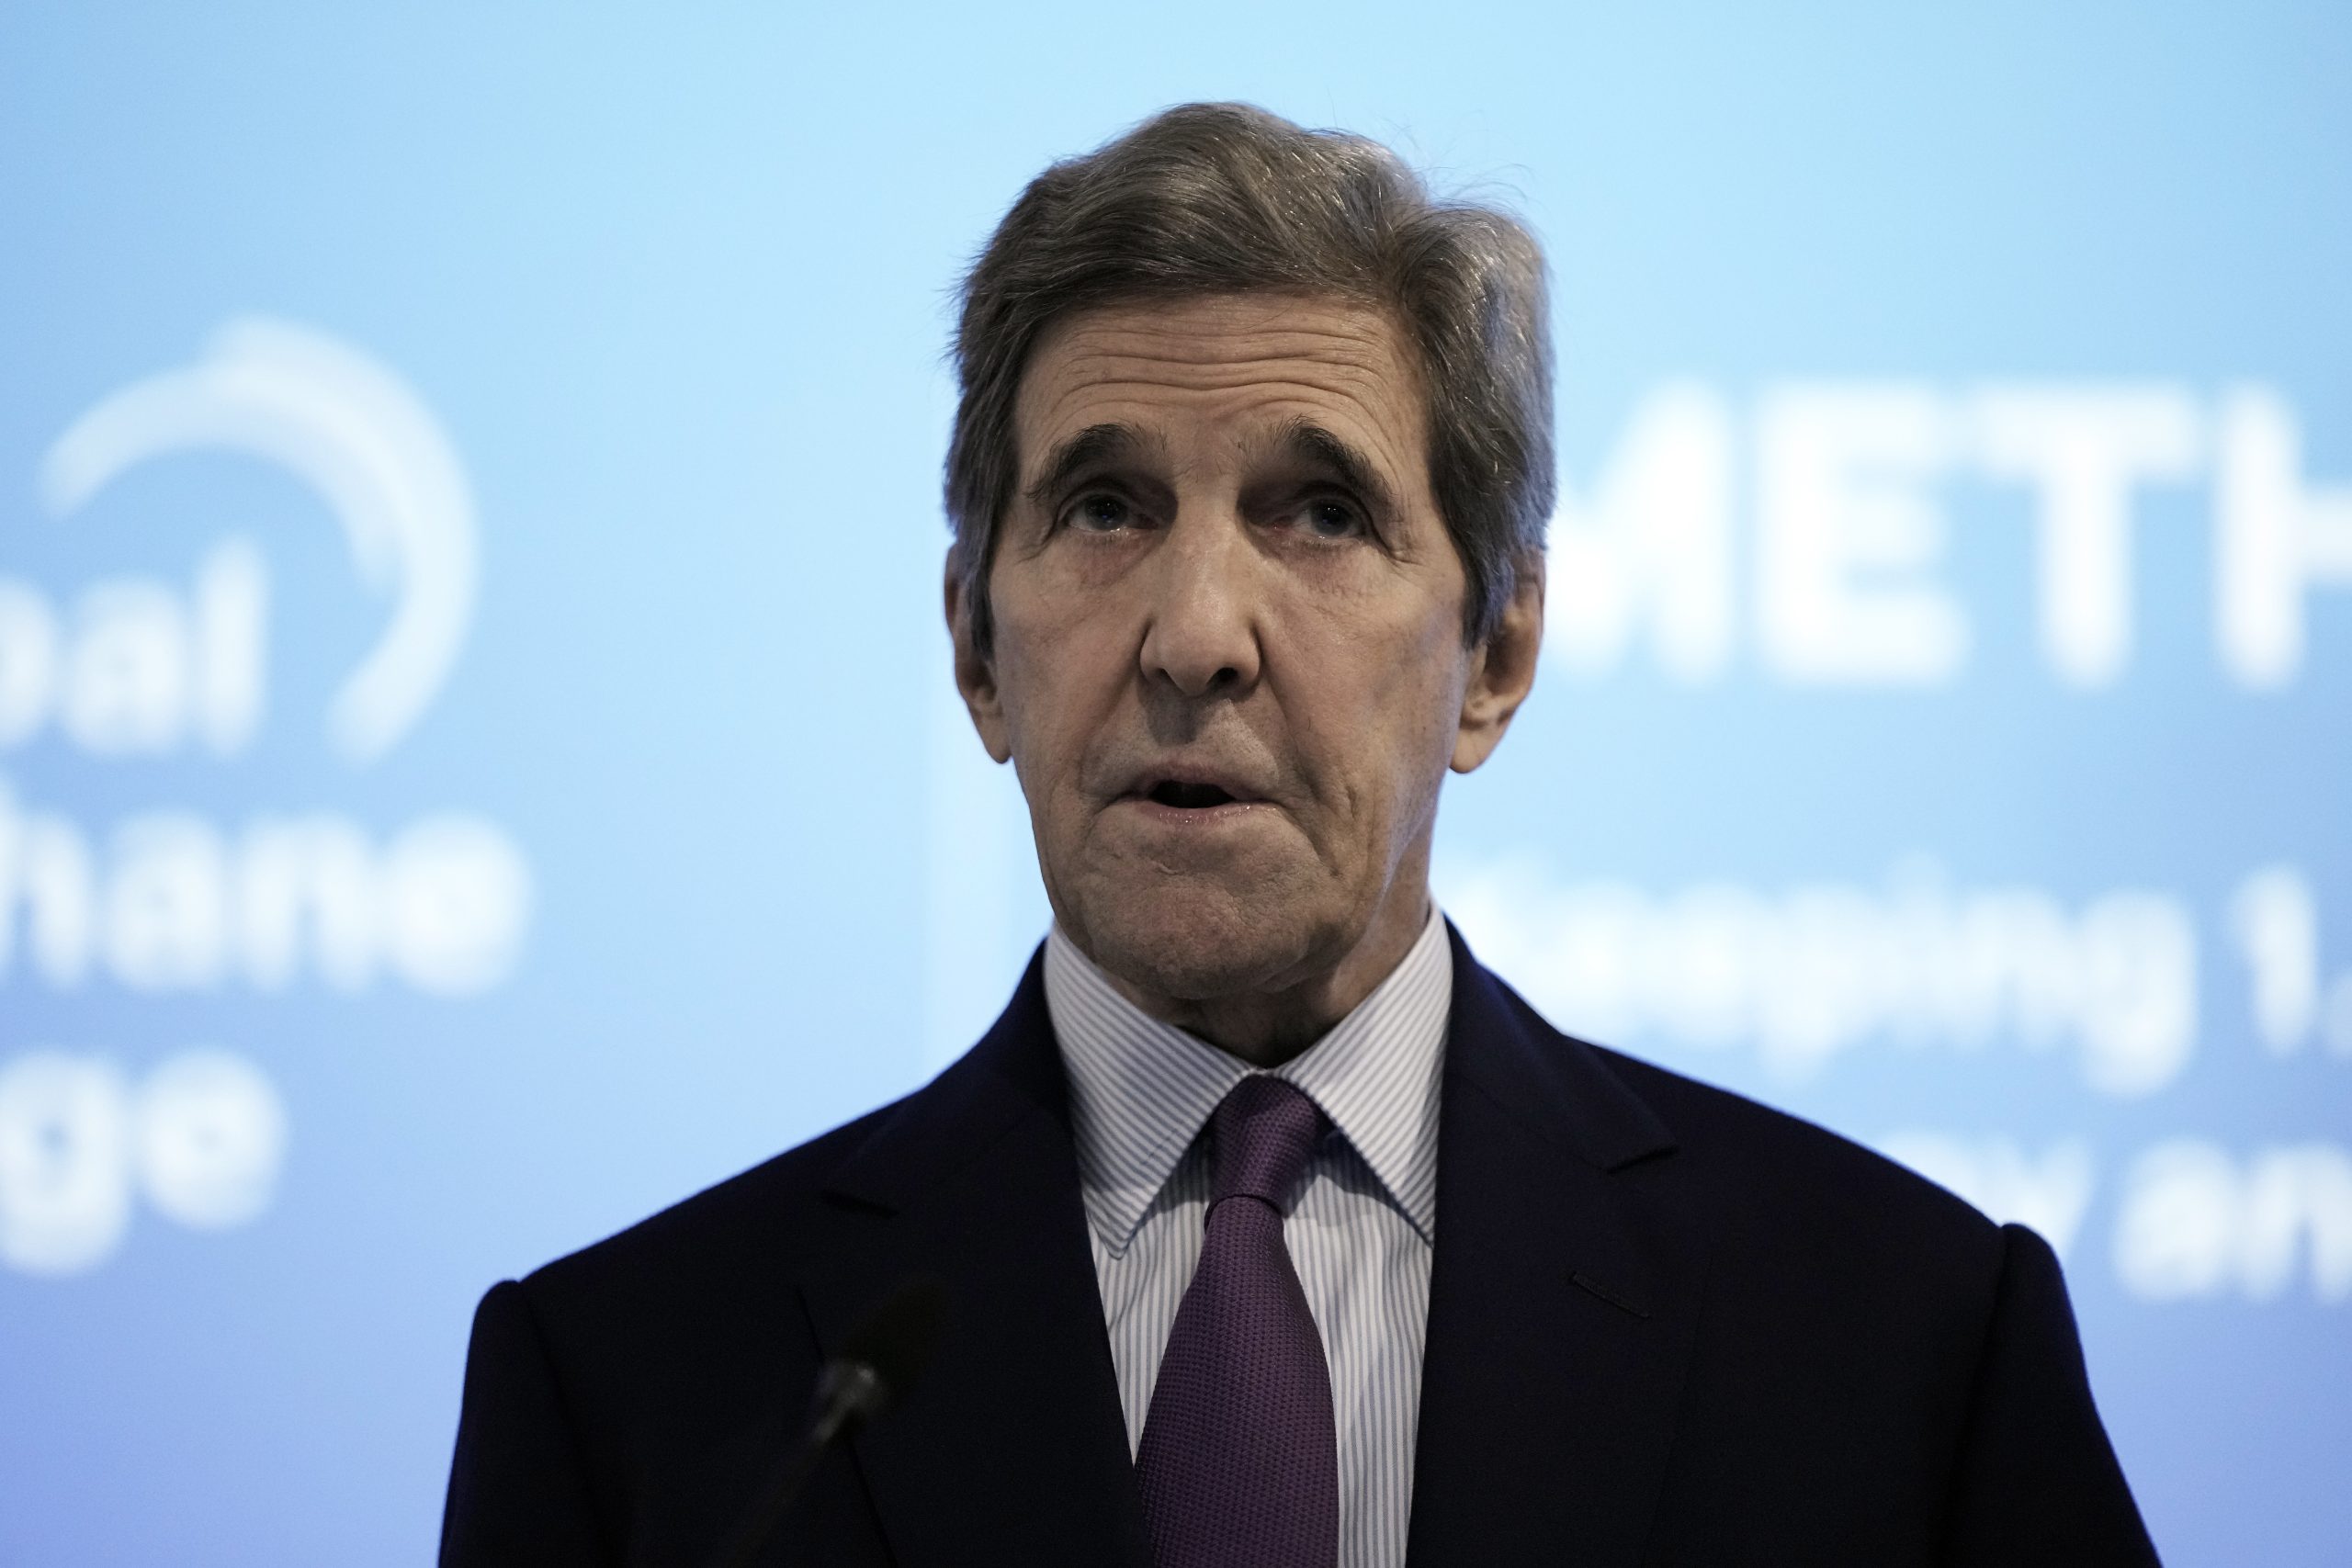 John Kerry comes down with Covid at climate summit